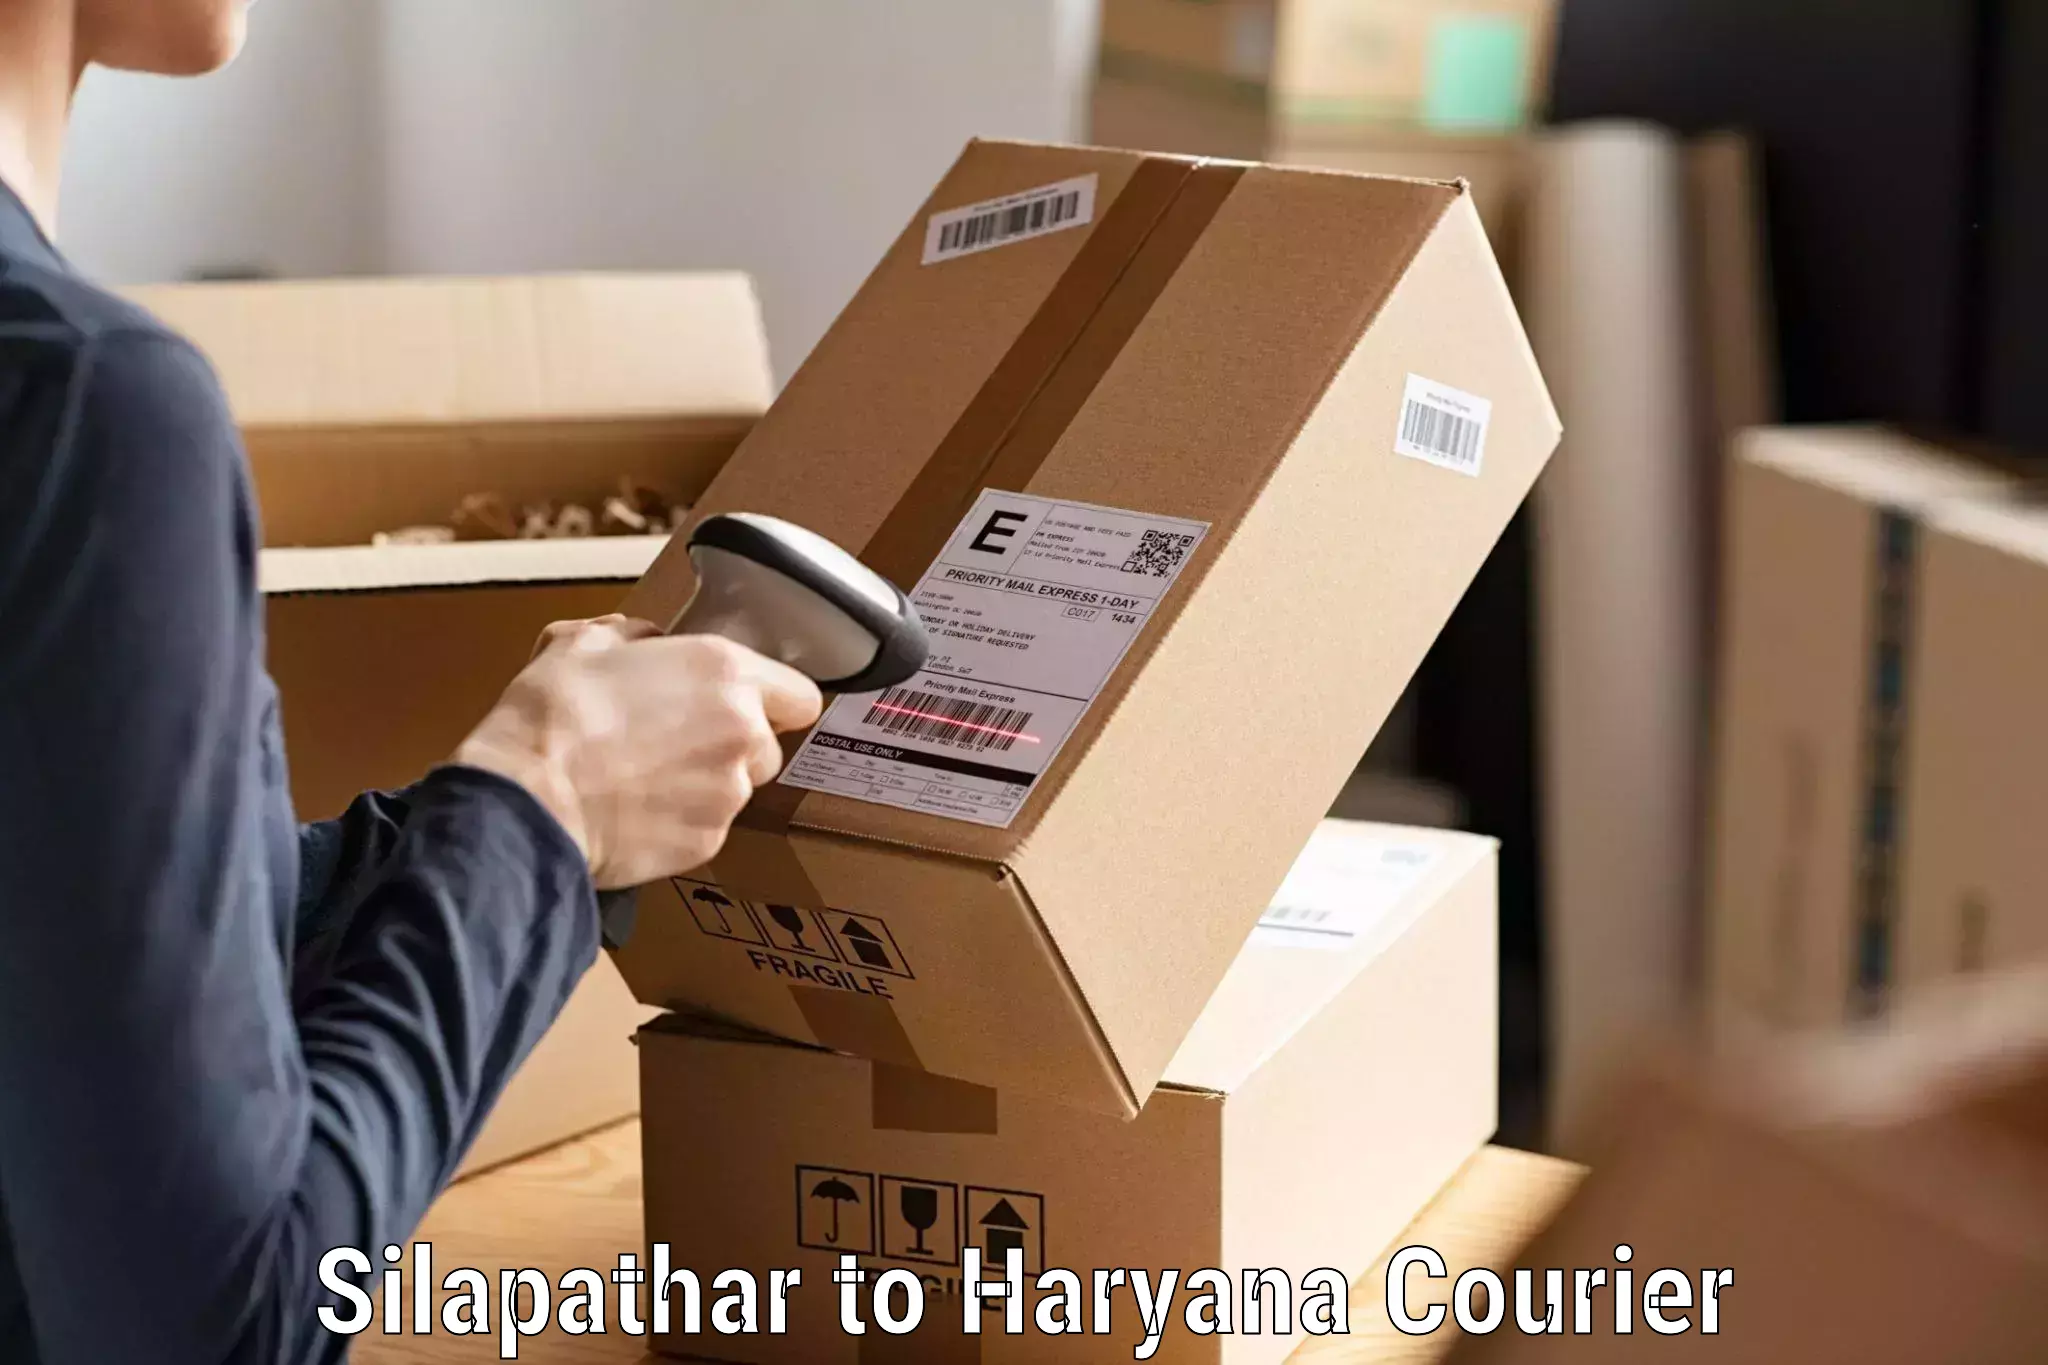 Express logistics providers Silapathar to Kaithal